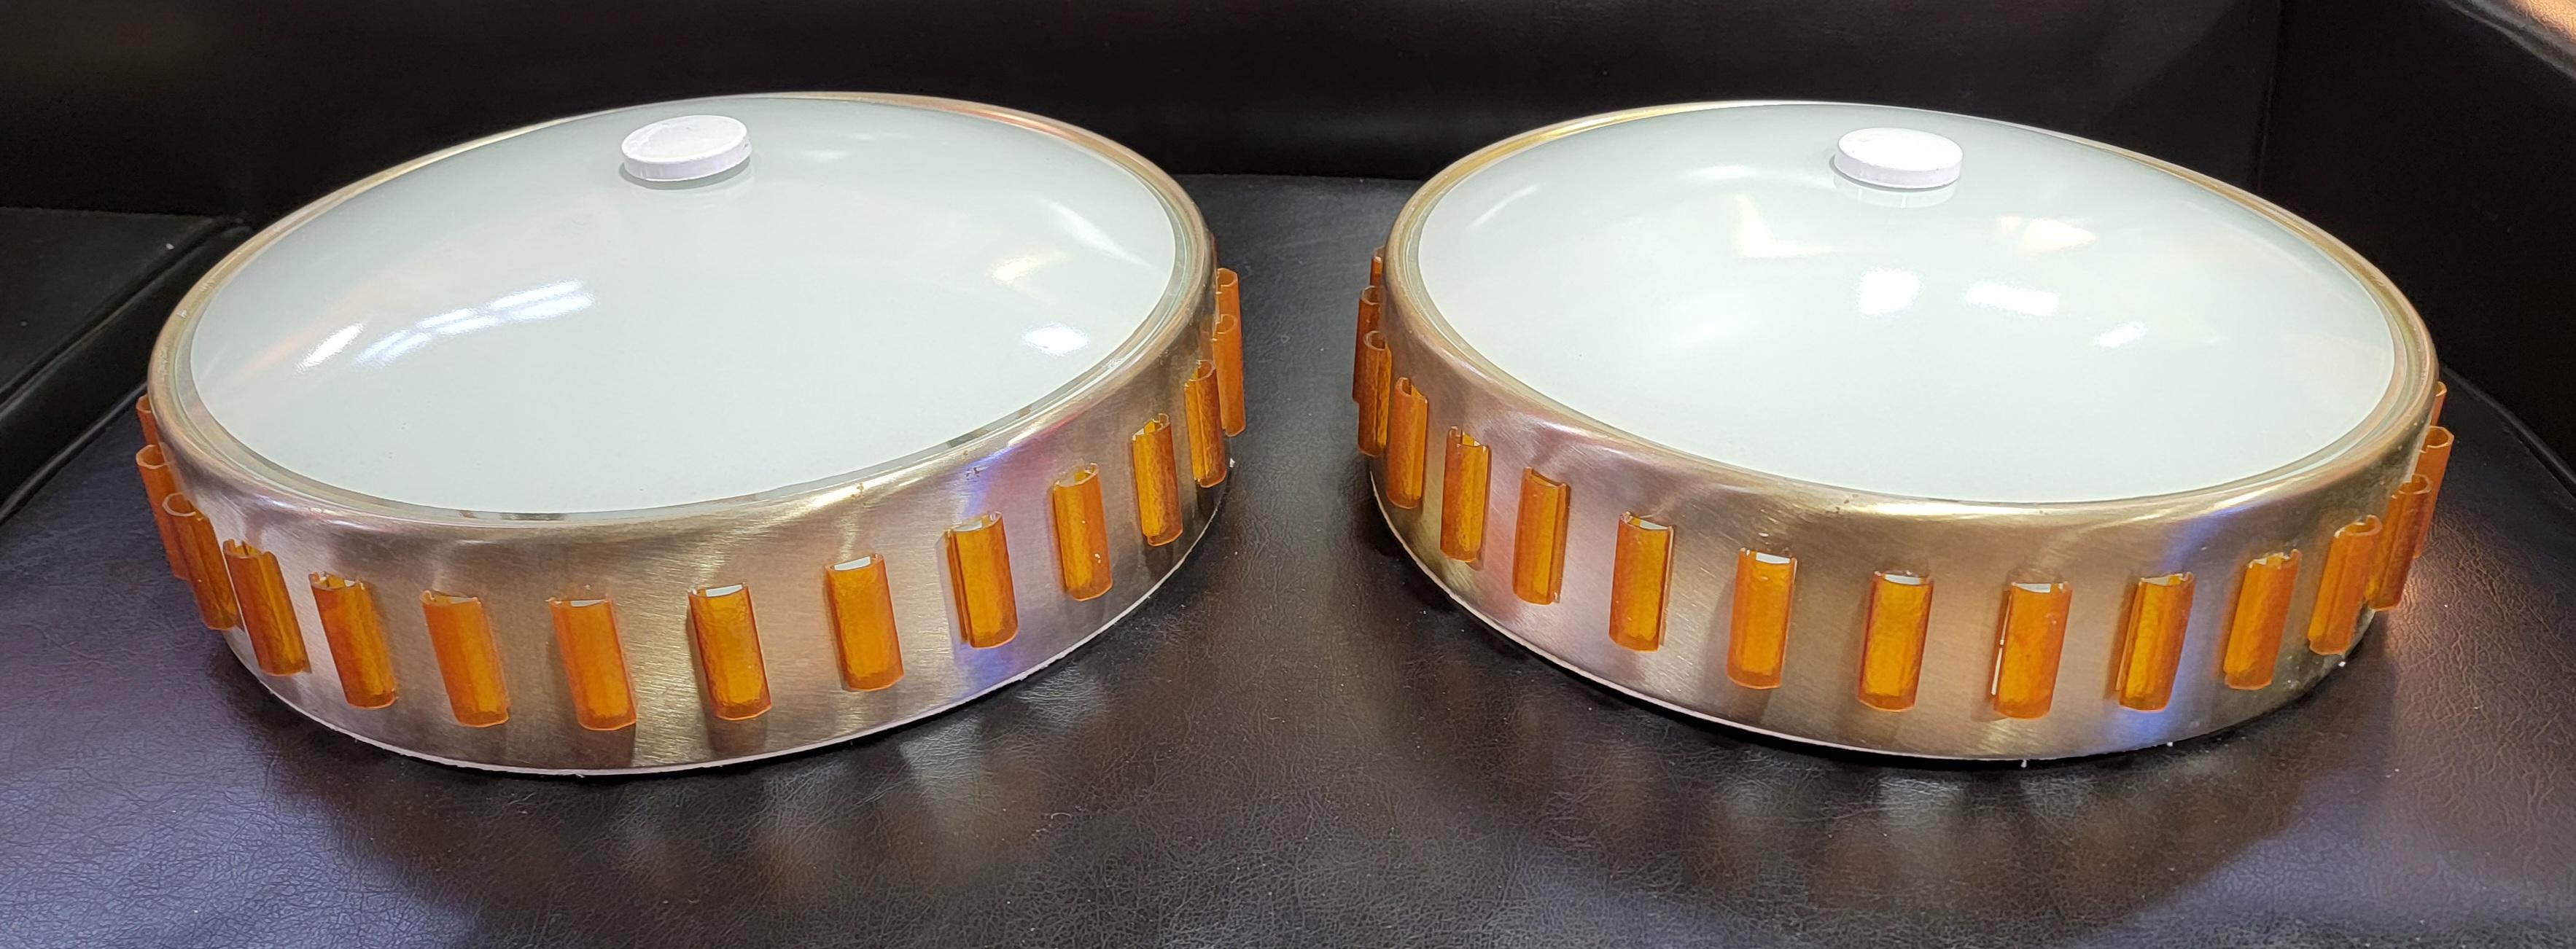 A pair of Mid-Century Modern flush mount ceiling fixtures with a space ship design. Metal frames, glass domed shades with amber colored plastic vents. Excellent original condition with original wiring working as intended. Each fixture holds 3 light